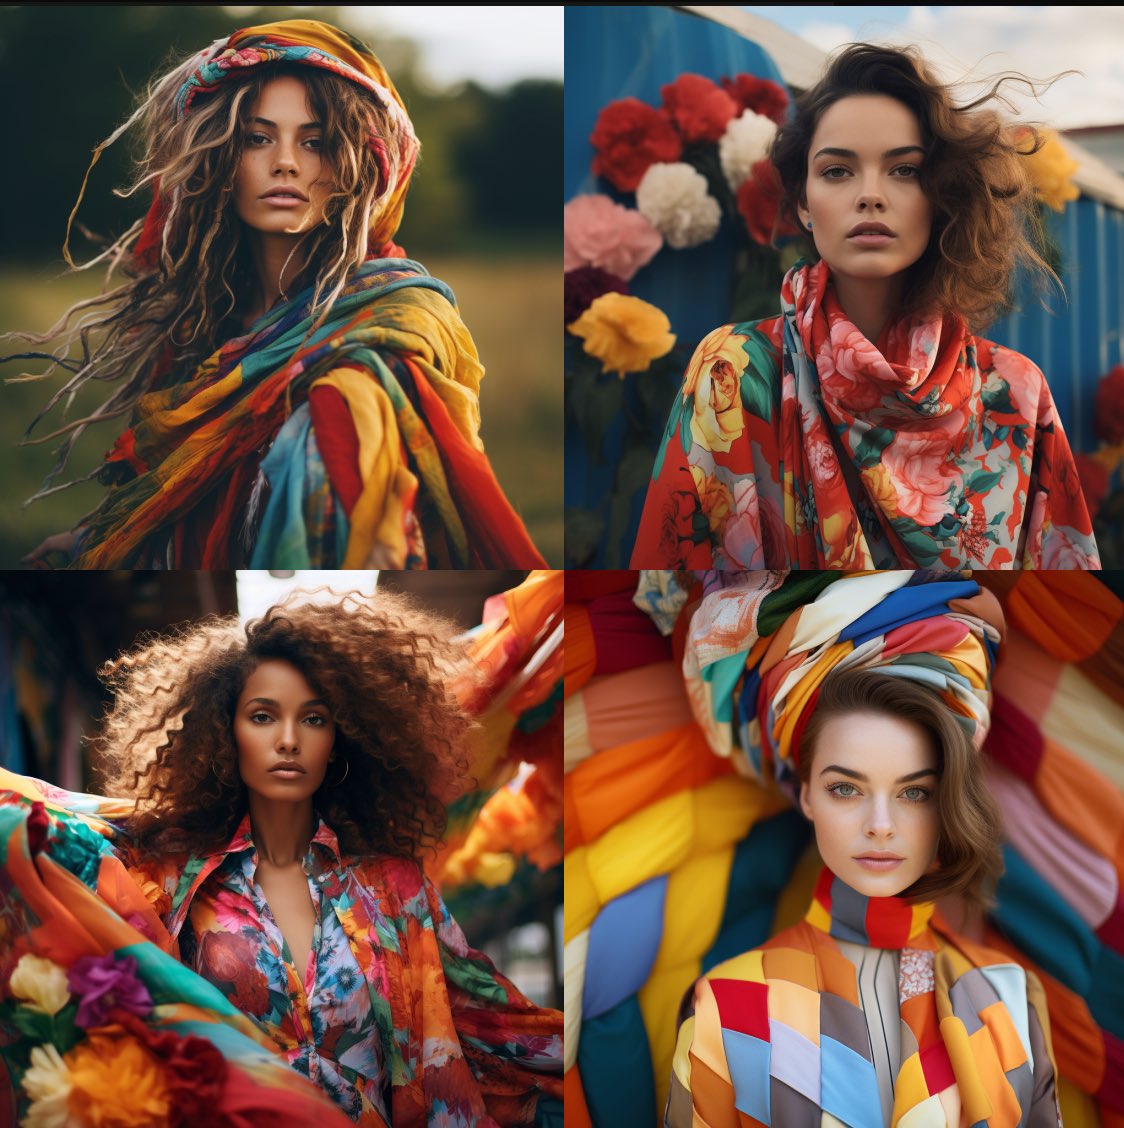 photographic outdoor portrait of a woman with colorful clothes --seed 1234567. KI-Prompt Inspiration: Film-Emulsionen